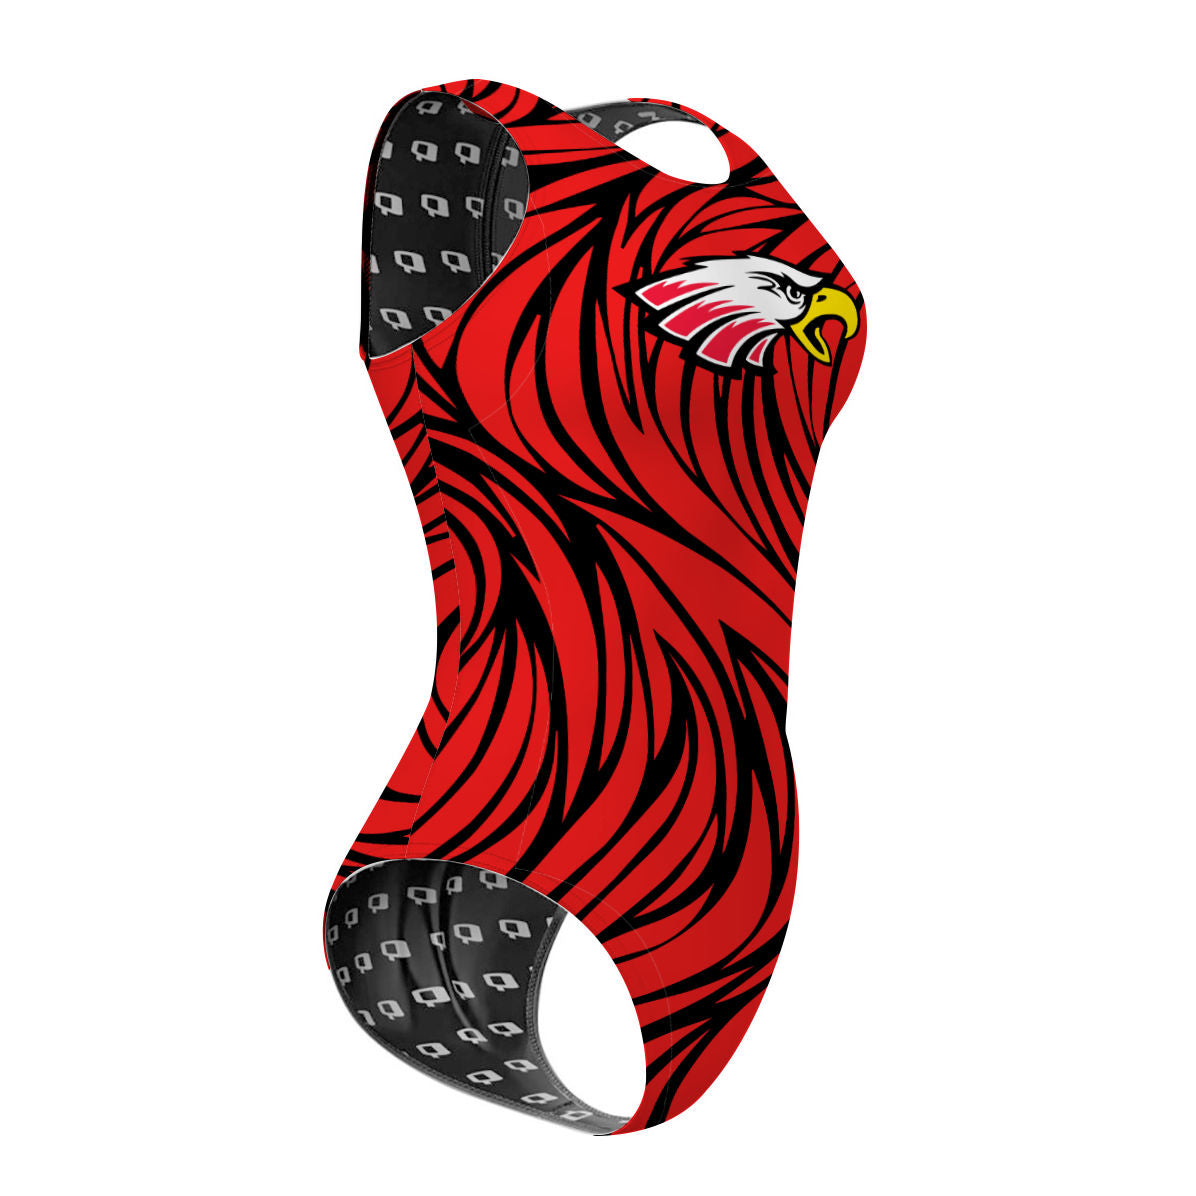 Edgewater Eagles HS - Waterpolo Strap